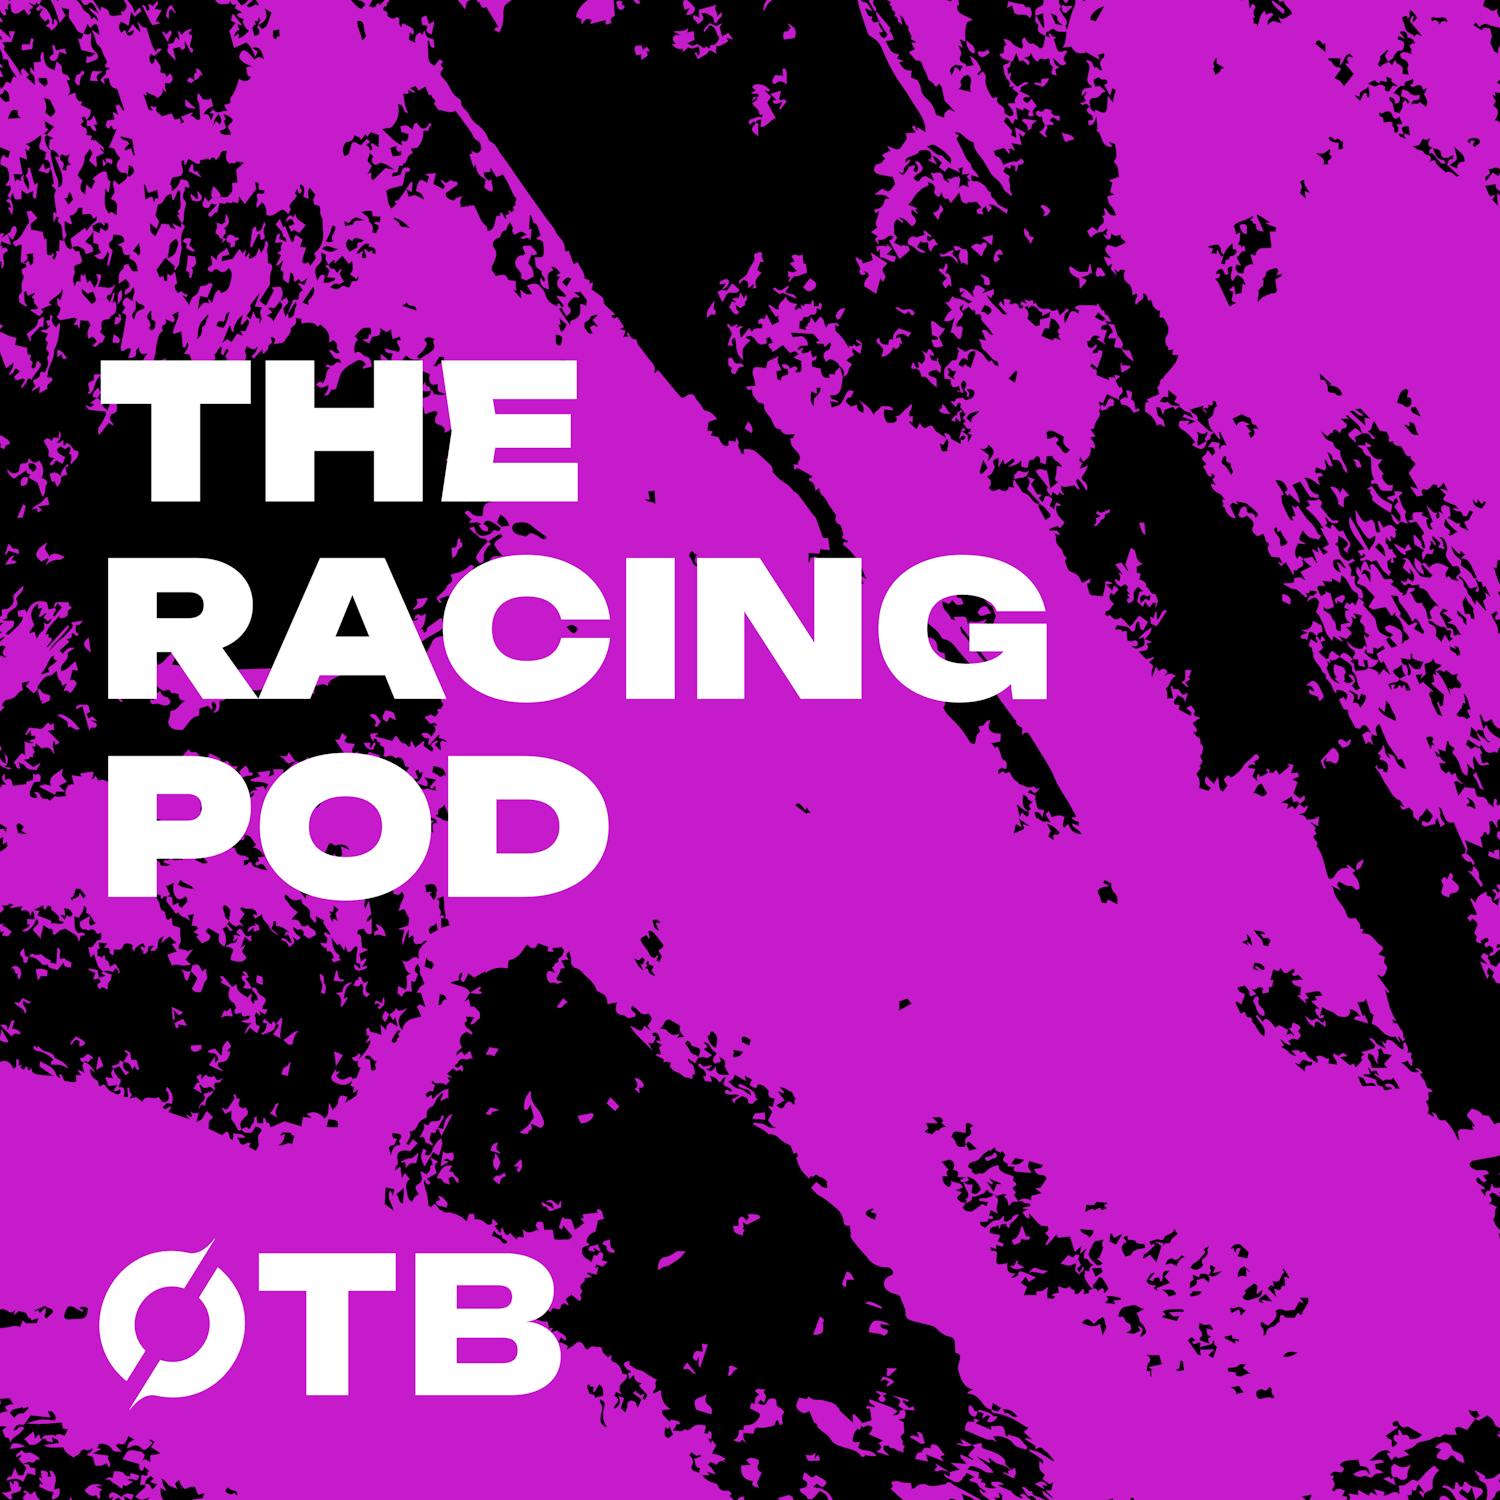 THE RACING POD: Aintree Grand National weekend! | Changes to make the race safer